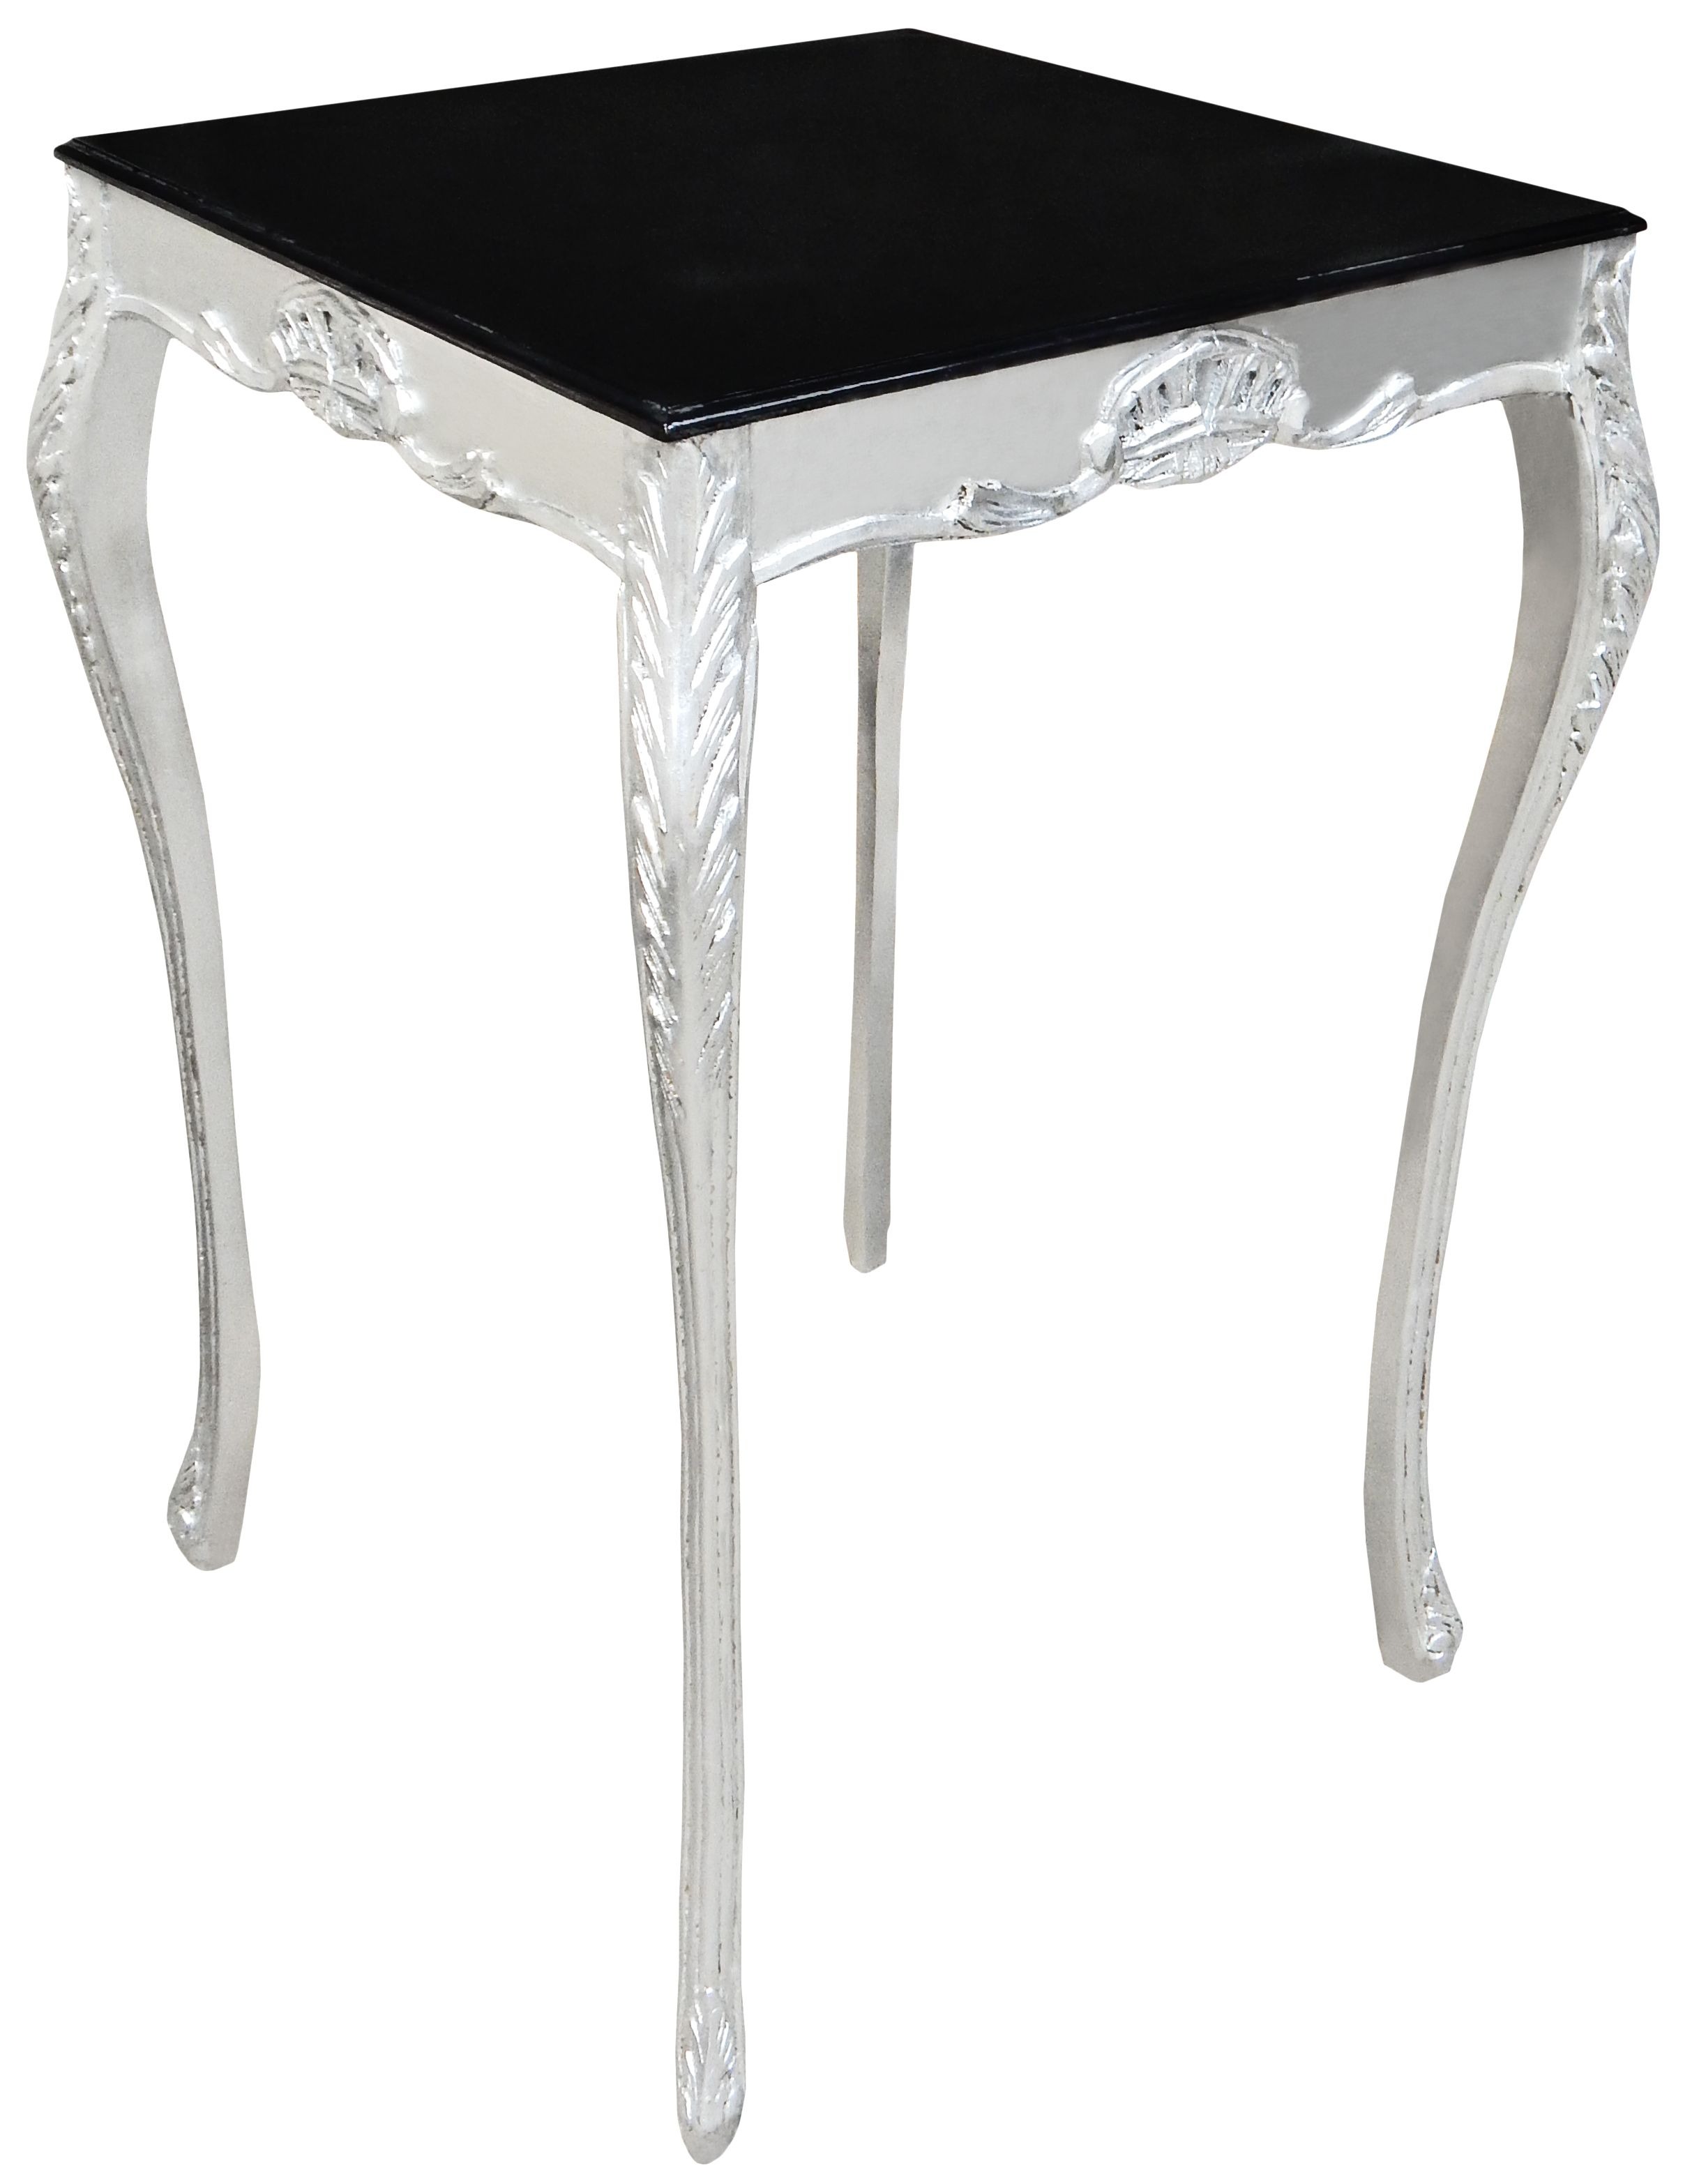 Square Baroque Bar Table Silver Wood, Silverwood Lamp Table Dimensions